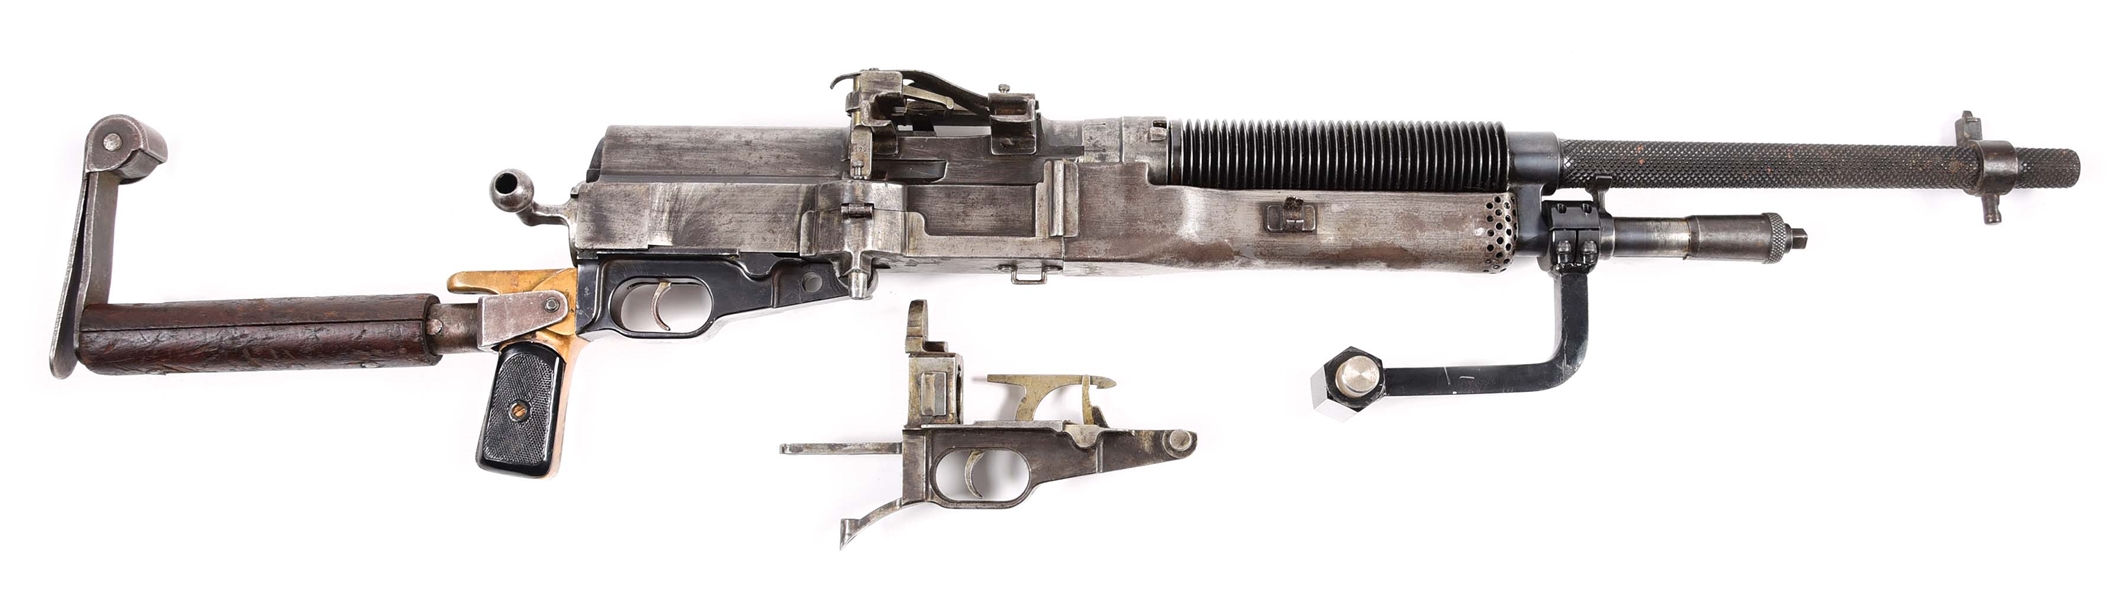 (N) SOUTH AMERICAN CONTRACT HOTCHKISS PORTATIVE MODEL 1910 MACHINE GUN WITH SHOULDER EXTENSION (CURIO AND RELIC).